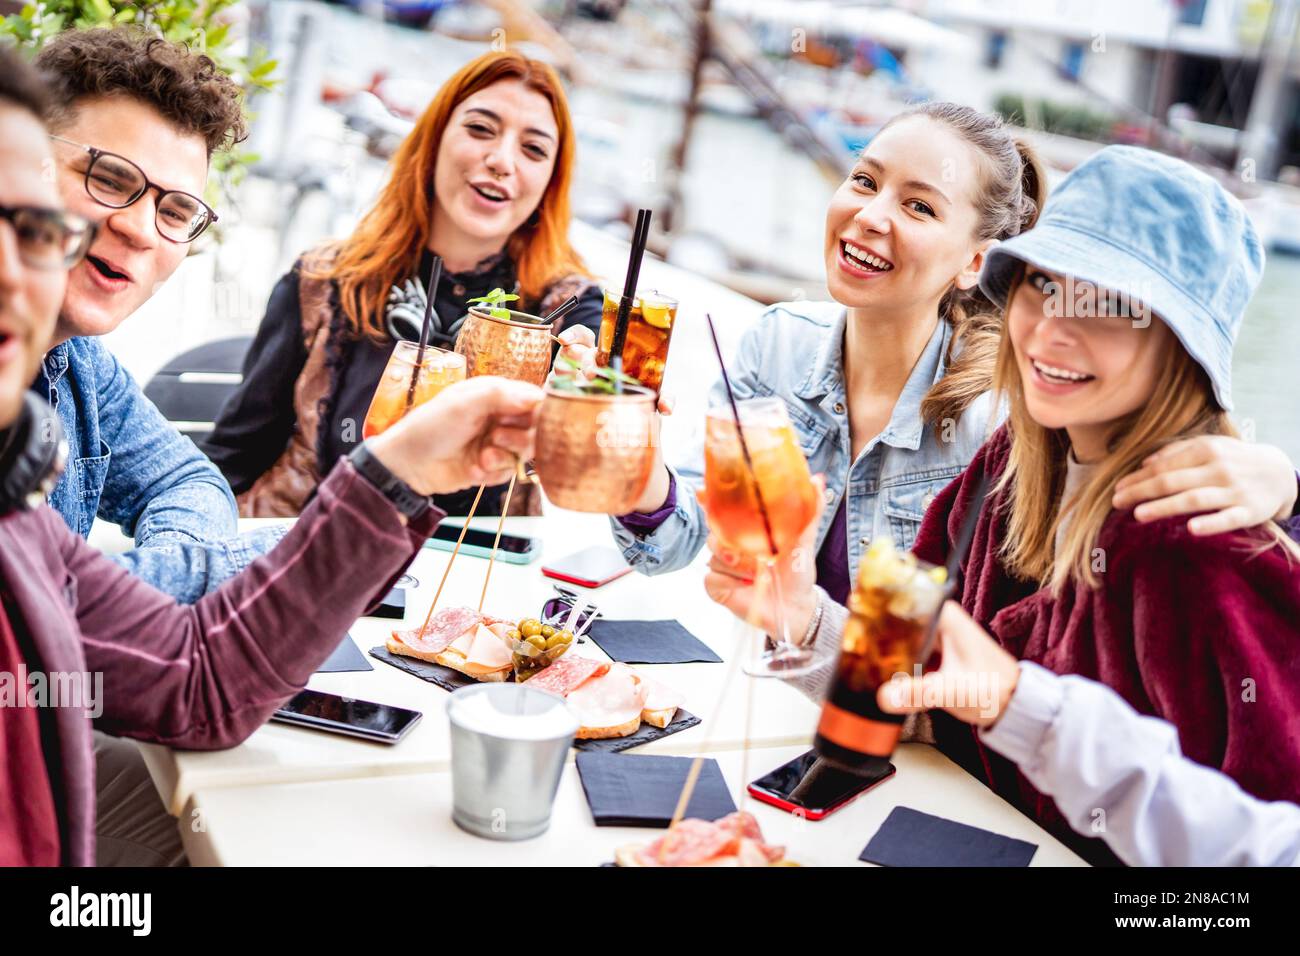 Trendy friends taking selfie at fancy restaurant out side - Life style concept with young people having fun together on happy hour at sidewalk cocktai Stock Photo